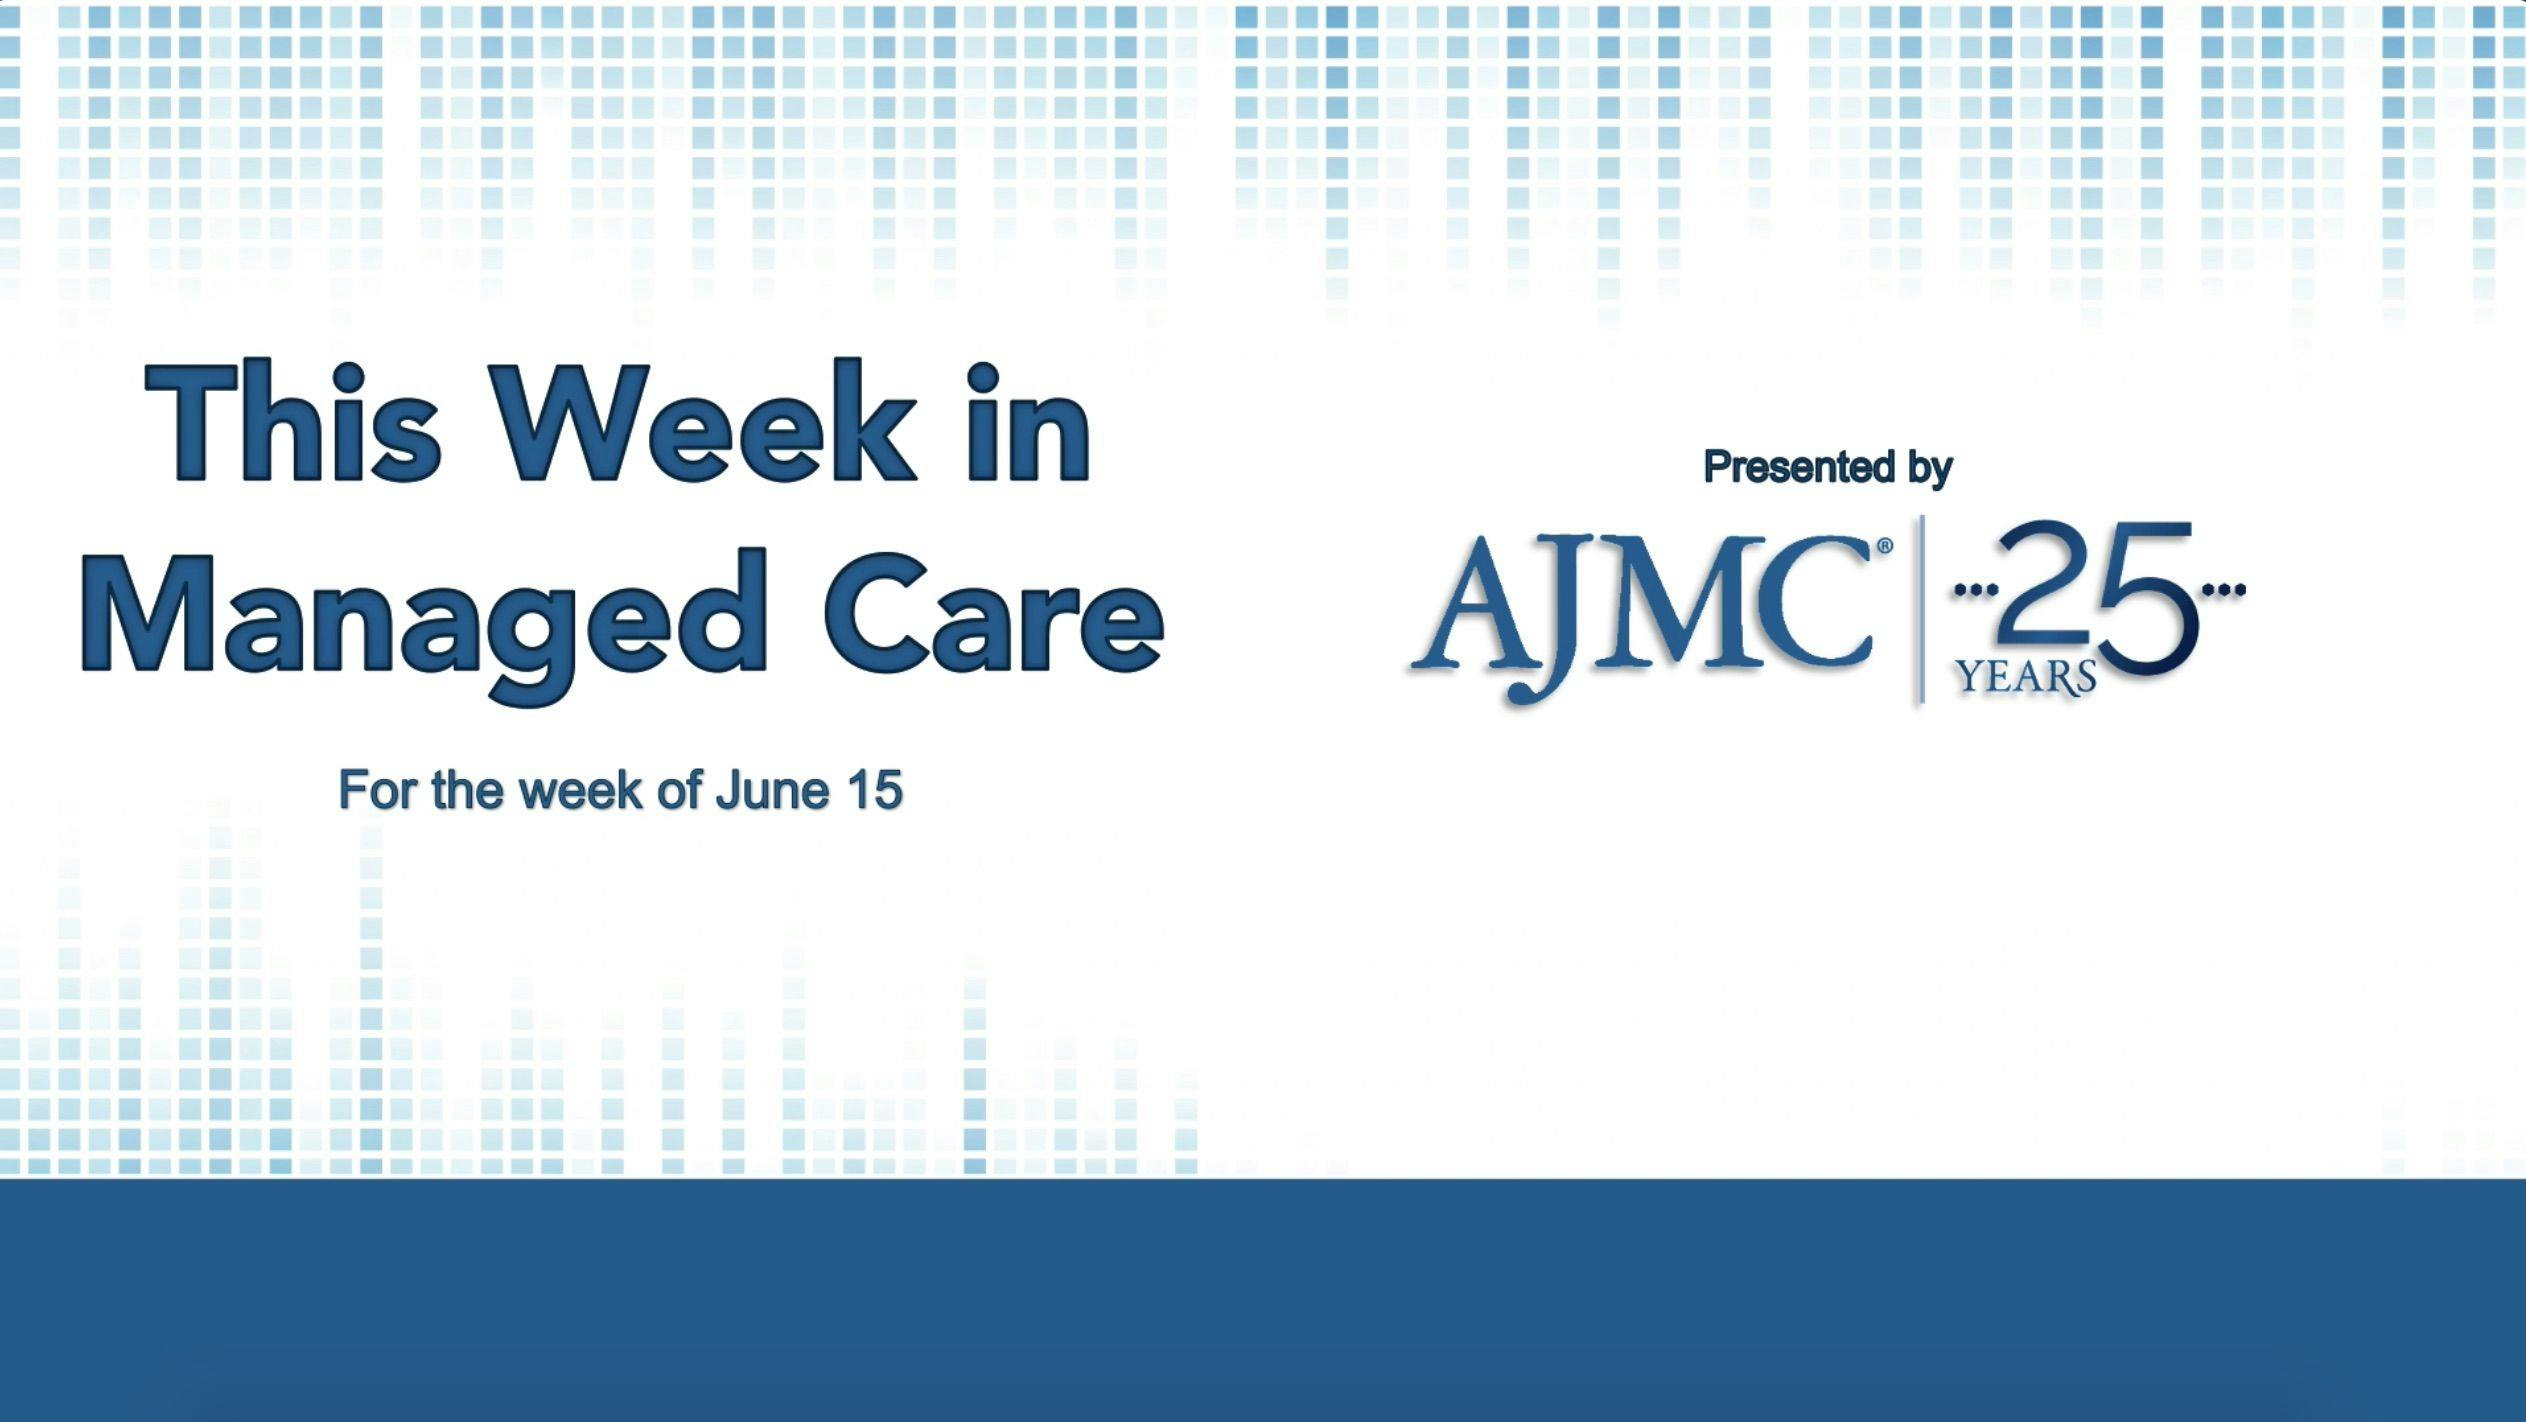 This Week in Managed Care: June 19, 2020